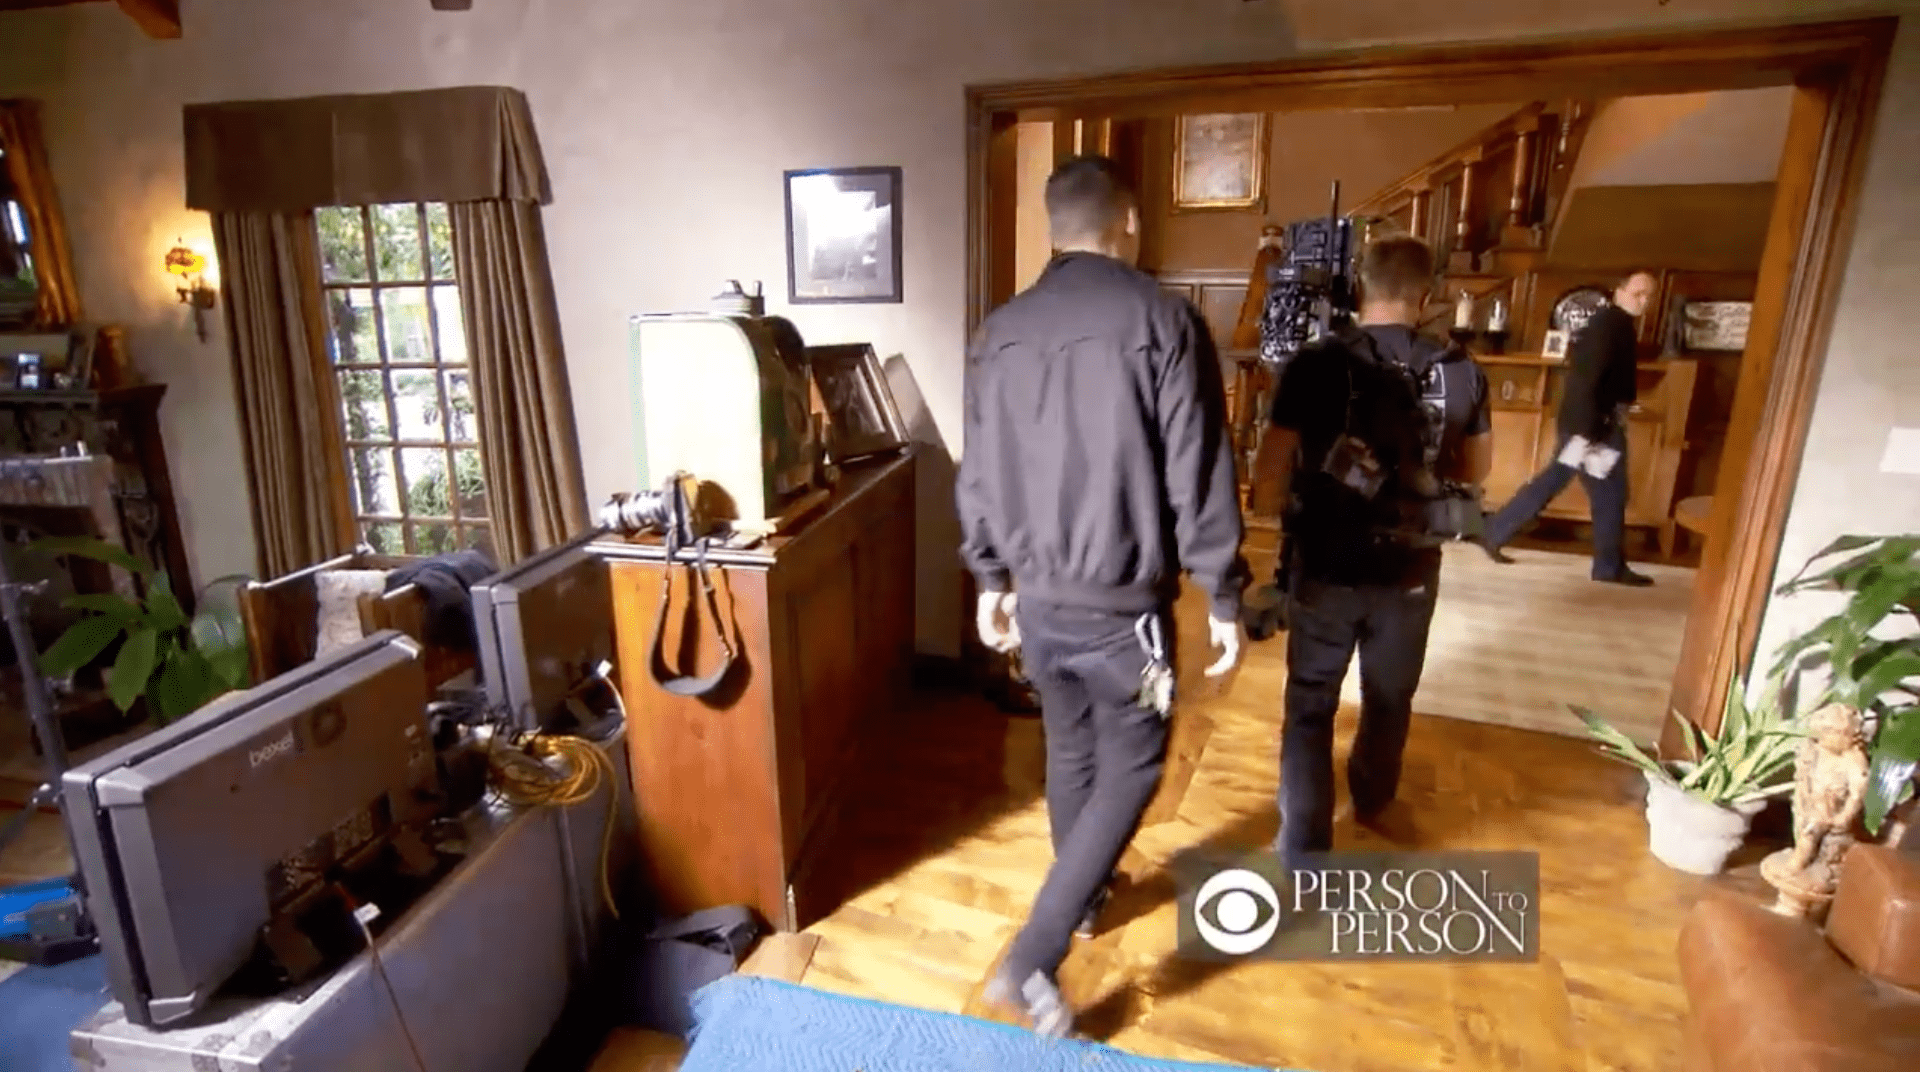 A part of George Clooney's Los Angeles home as seen on CBS News' "Person to Person" on February 8, 2012. | Source: YouTube/CBS News